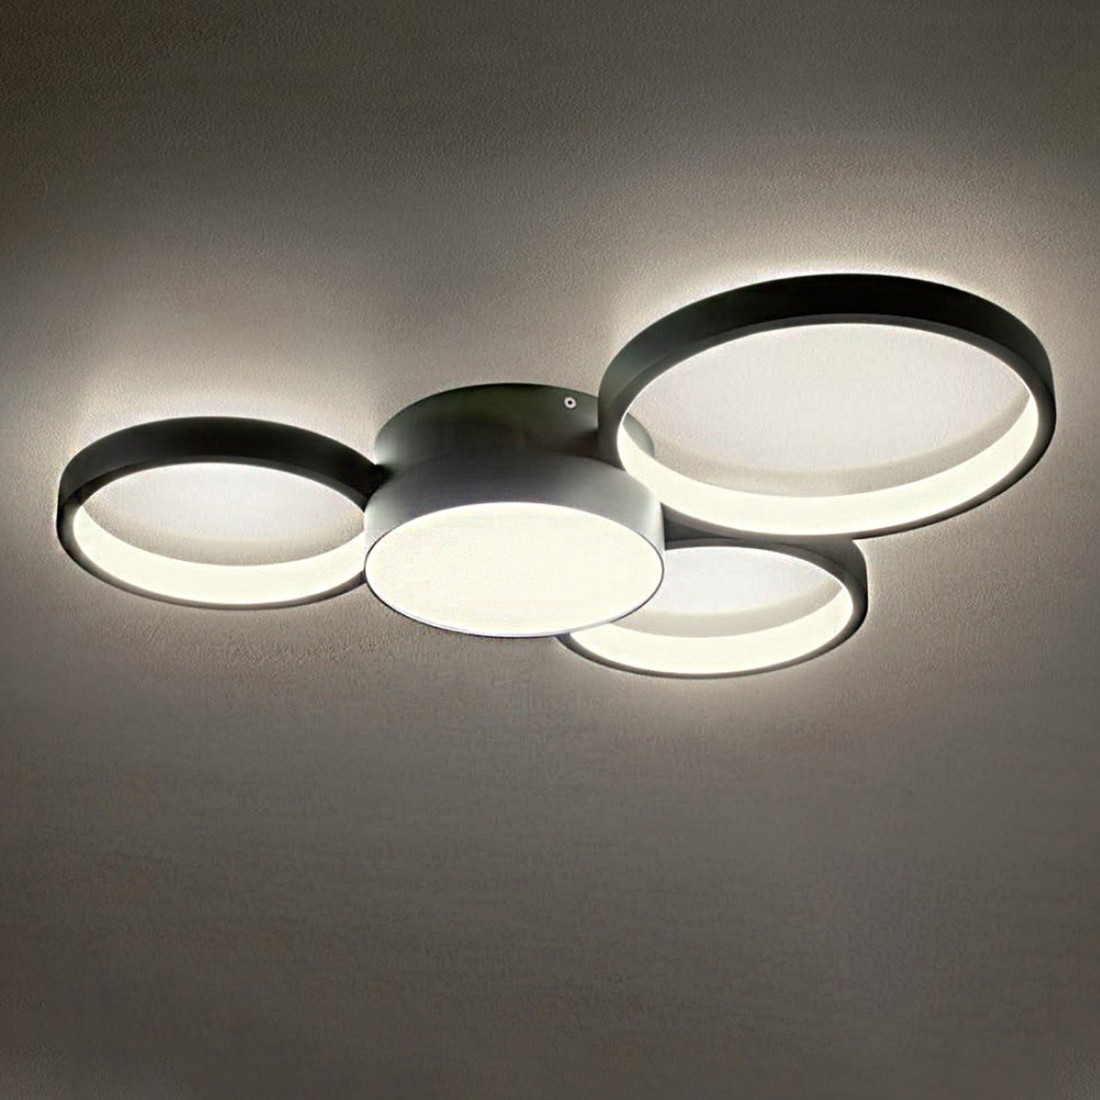 Redo Group CRONOS 2536 2537 2538 plafonnier led dimmable